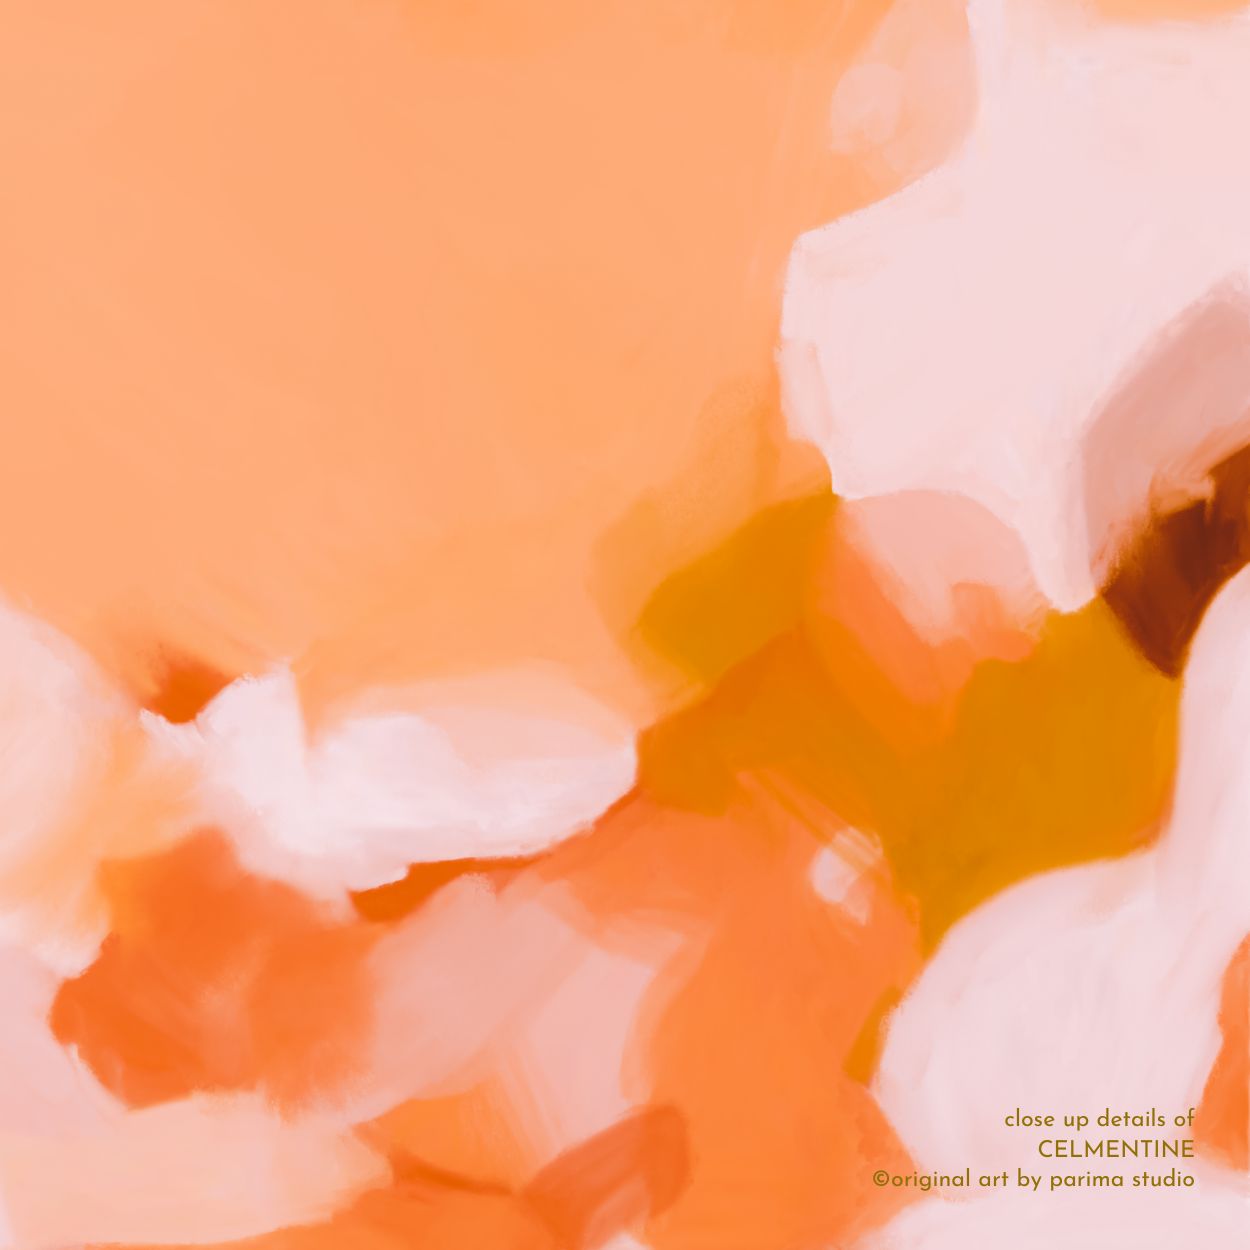 Close up of Clementine, orange colorful abstract wall art print by Parima Studio